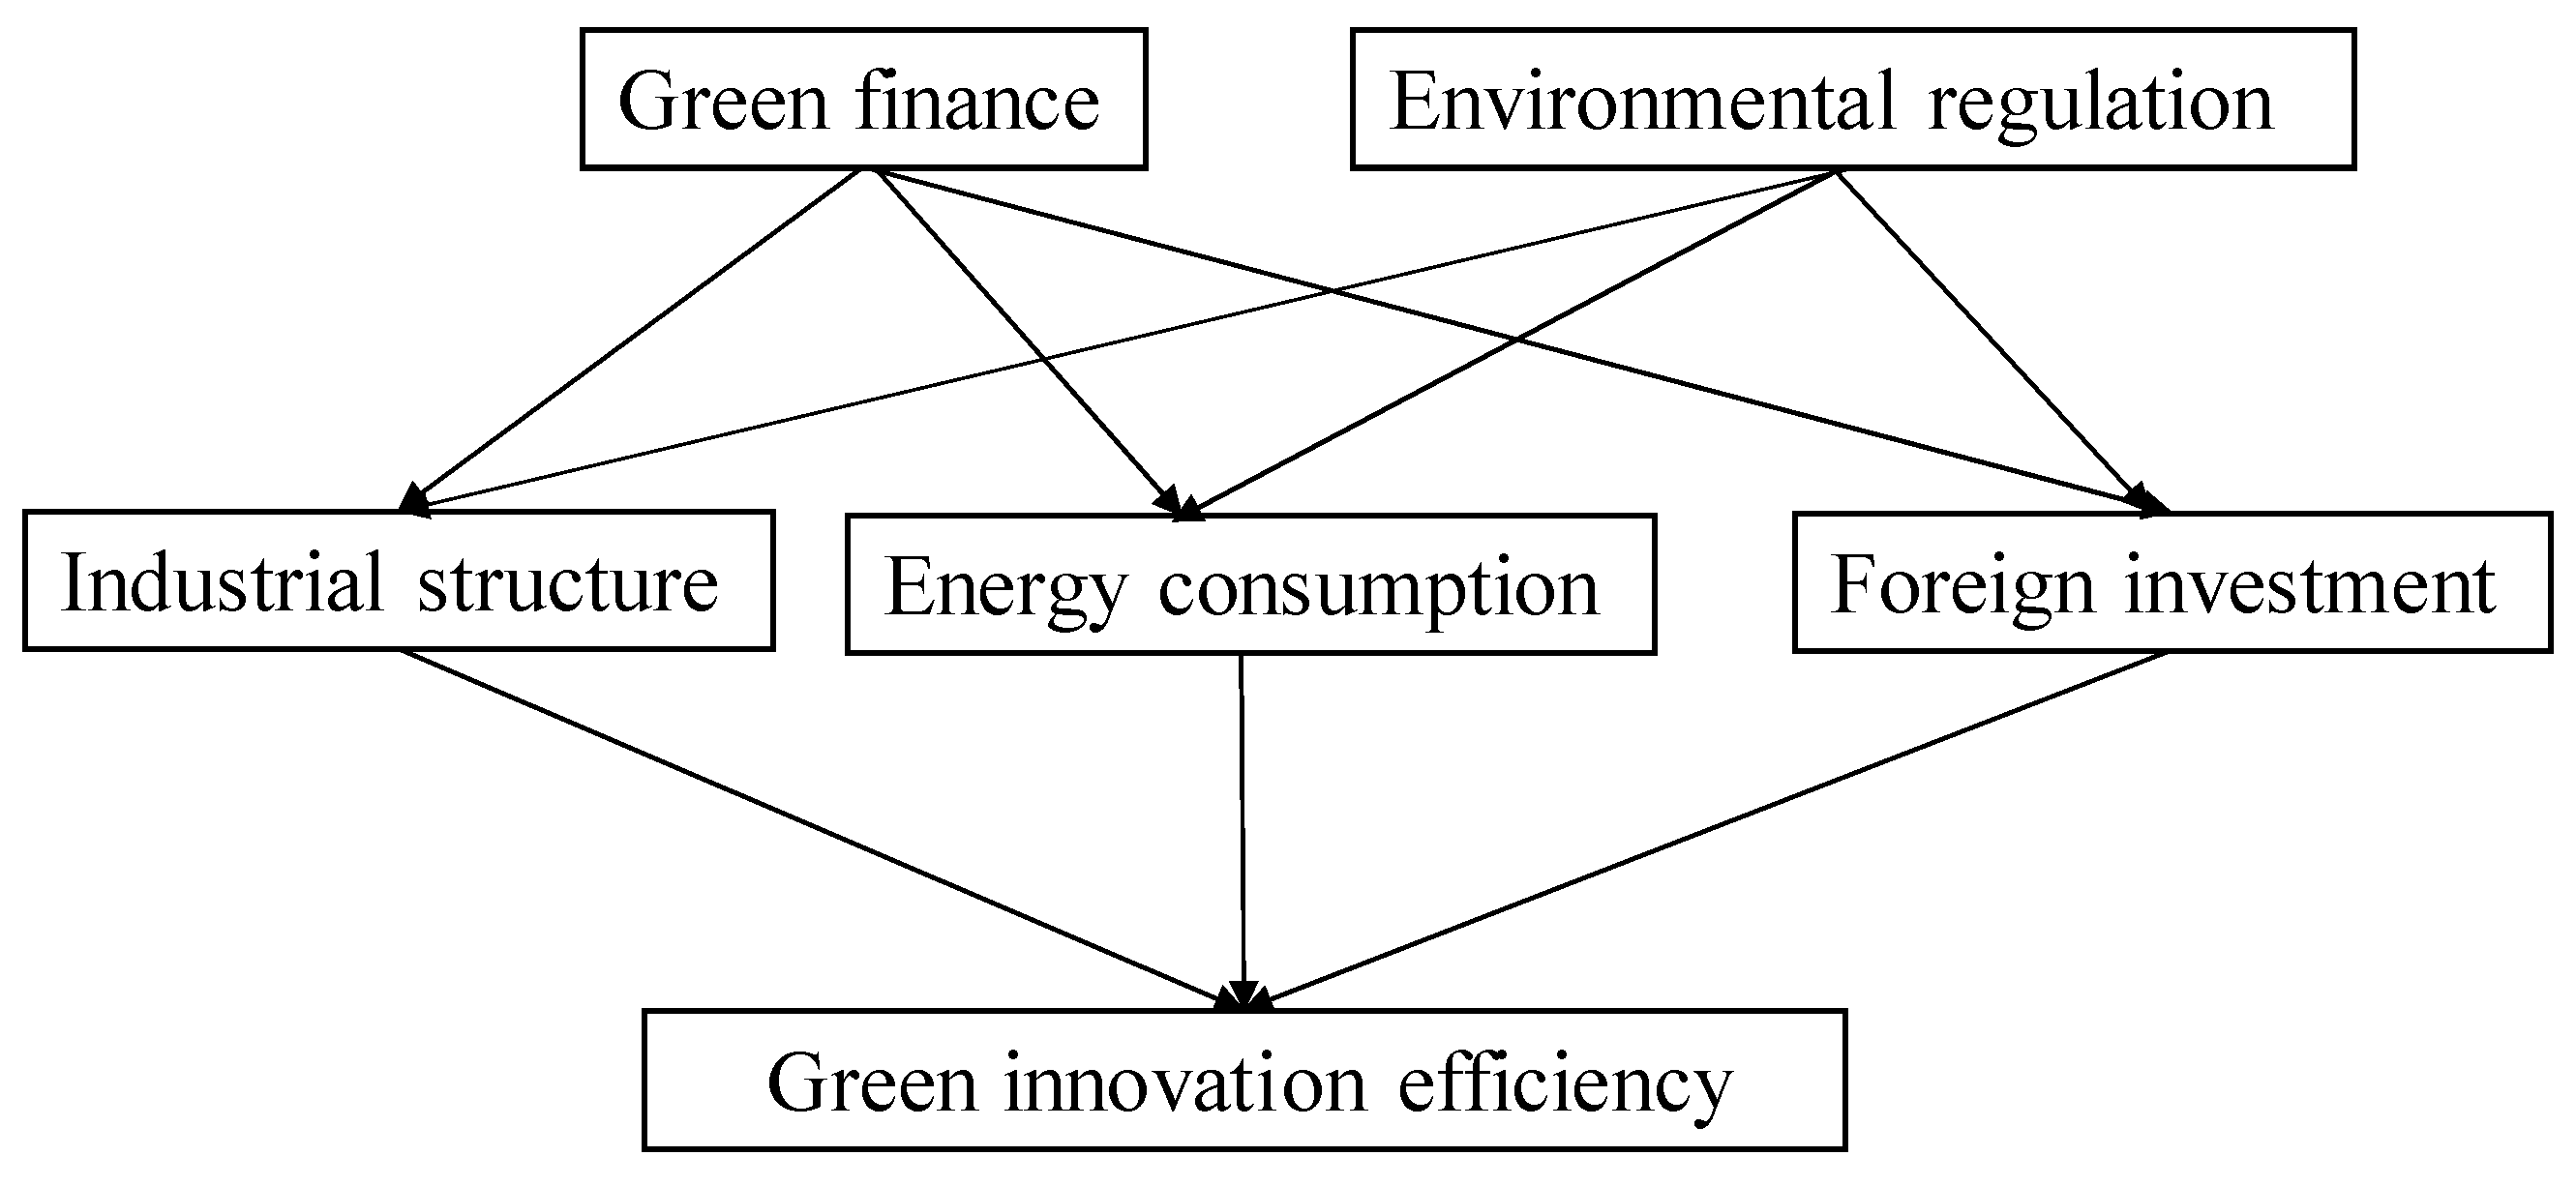 green finance thesis